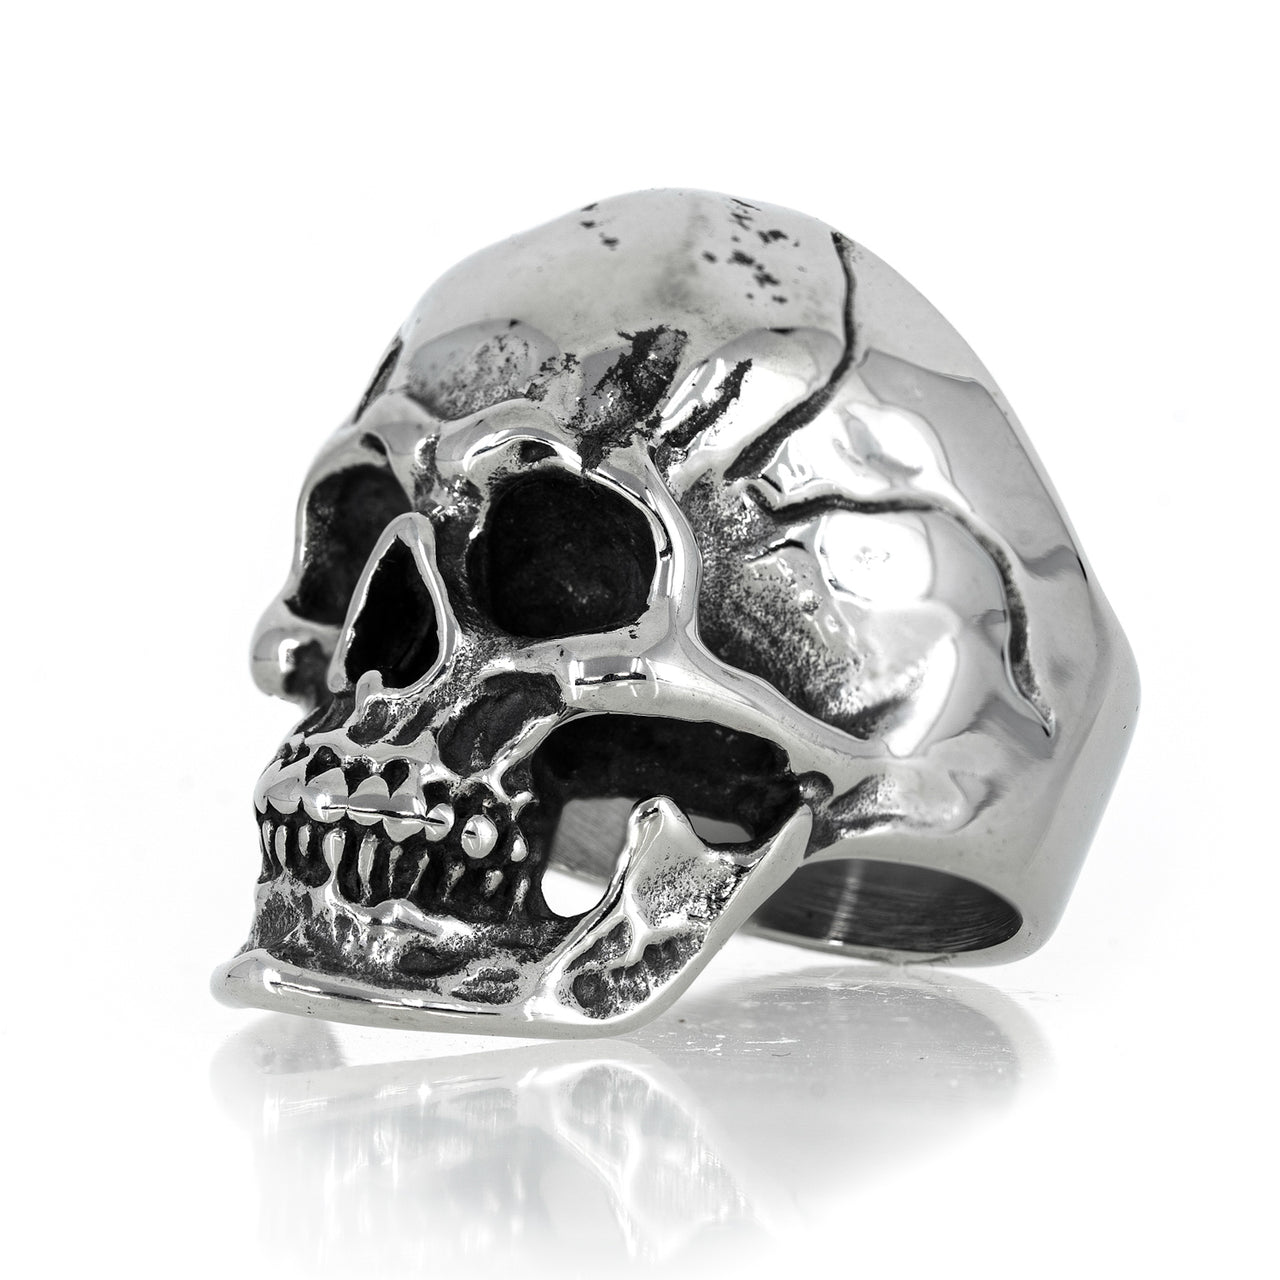 Large Stainless Steel Skull Ring - Black Feather Design